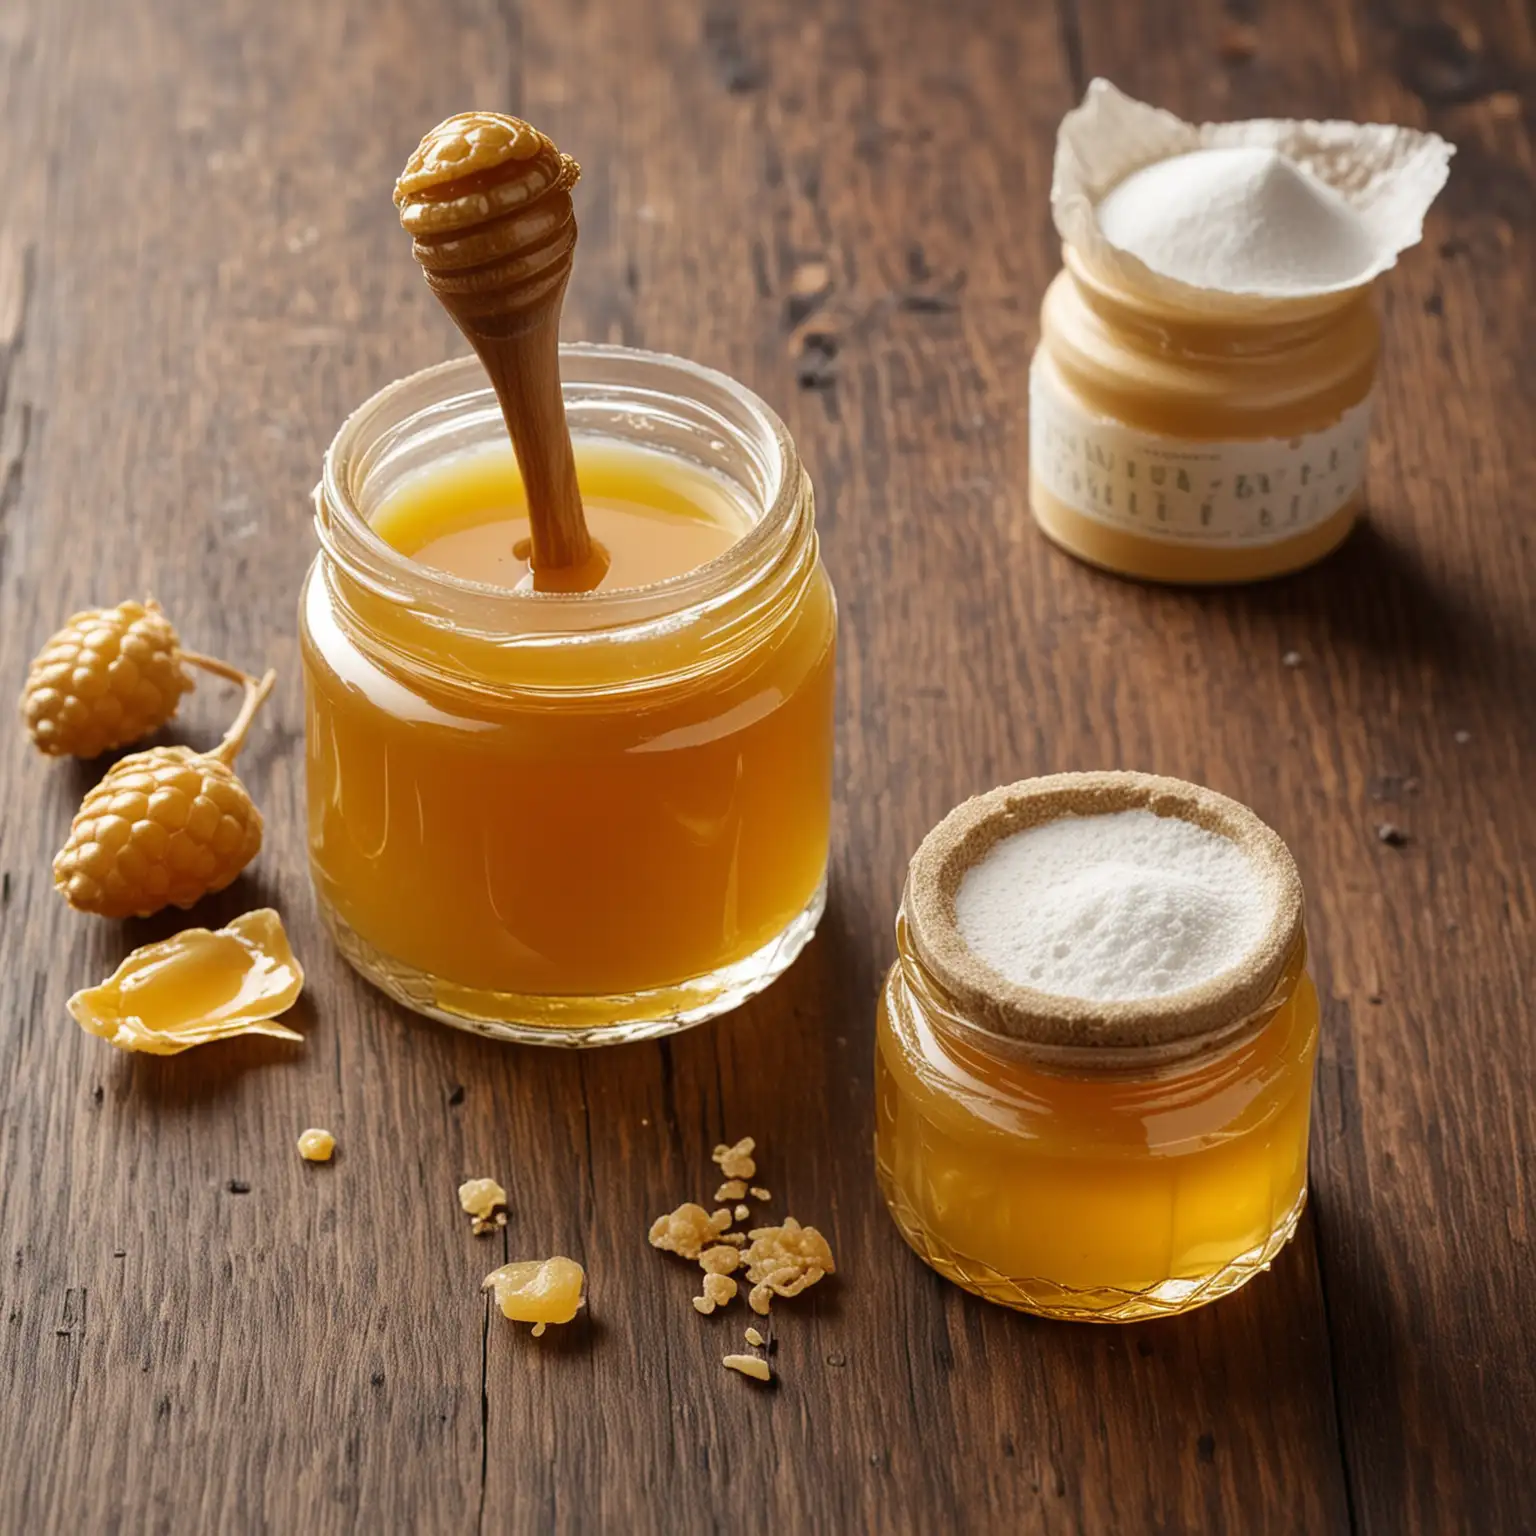 Create an image depicting royal jelly in both its liquid and powder forms. The liquid royal jelly should be shown in a small, elegant glass jar, with a spoon beside it dripping the viscous, golden substance. Next to it, display a small mound of fine, white powder royal jelly on a smooth, dark wooden surface, with a small scoop partially filled with the powder.  Ensure the image evokes a sense of purity and natural wellness.